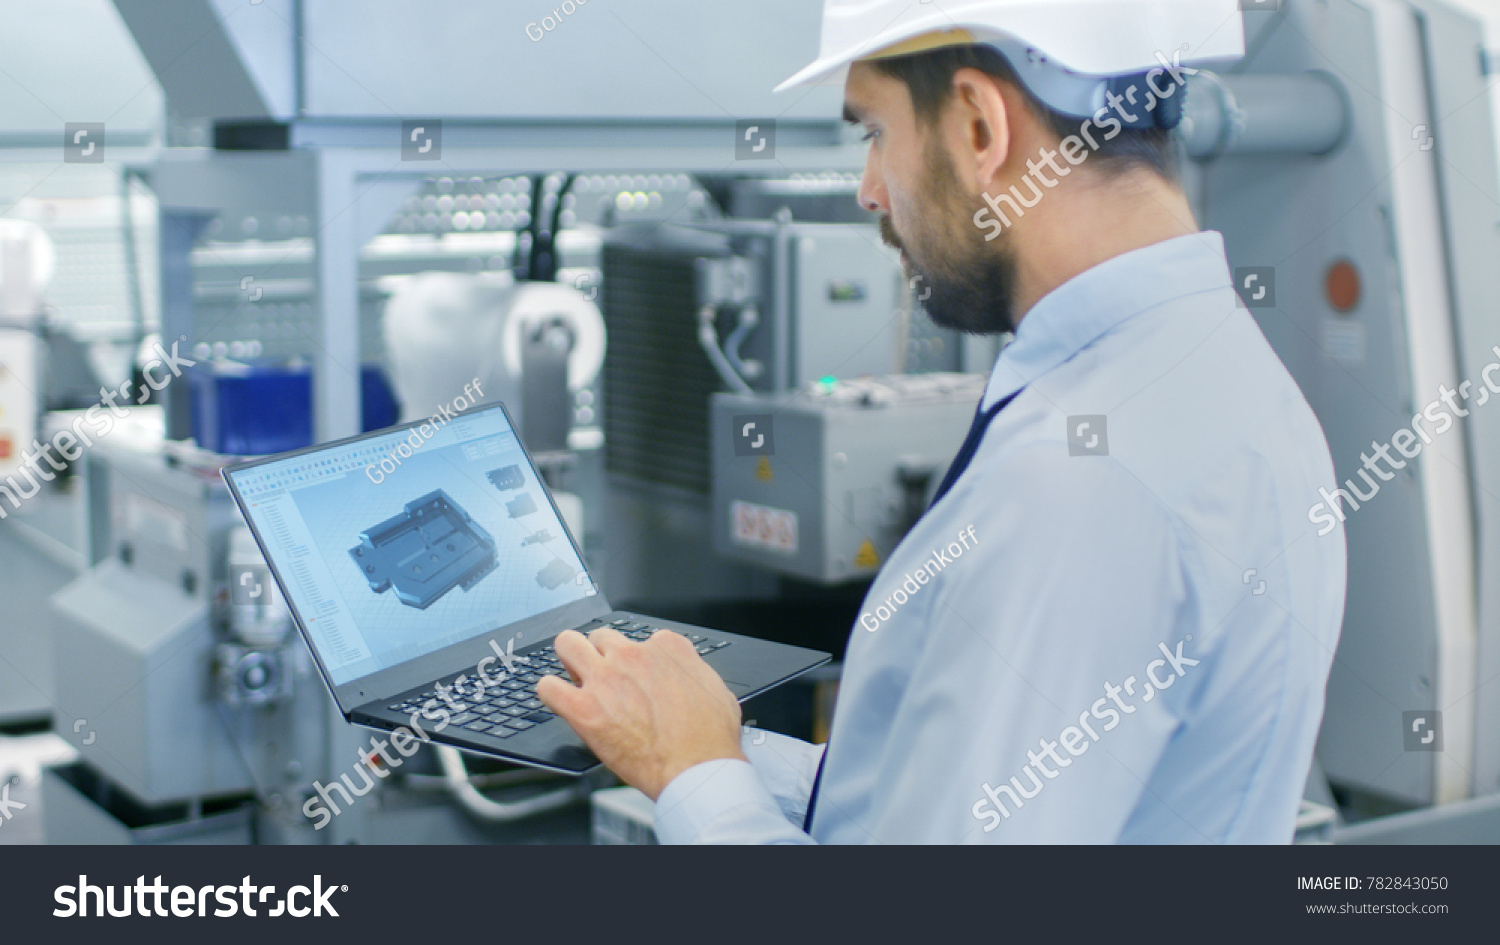 Chief Engineer in the Hard Hat Holds Laptop with 3D Component Model on it's Screen. In the Background Modern Factory Equipment. #782843050